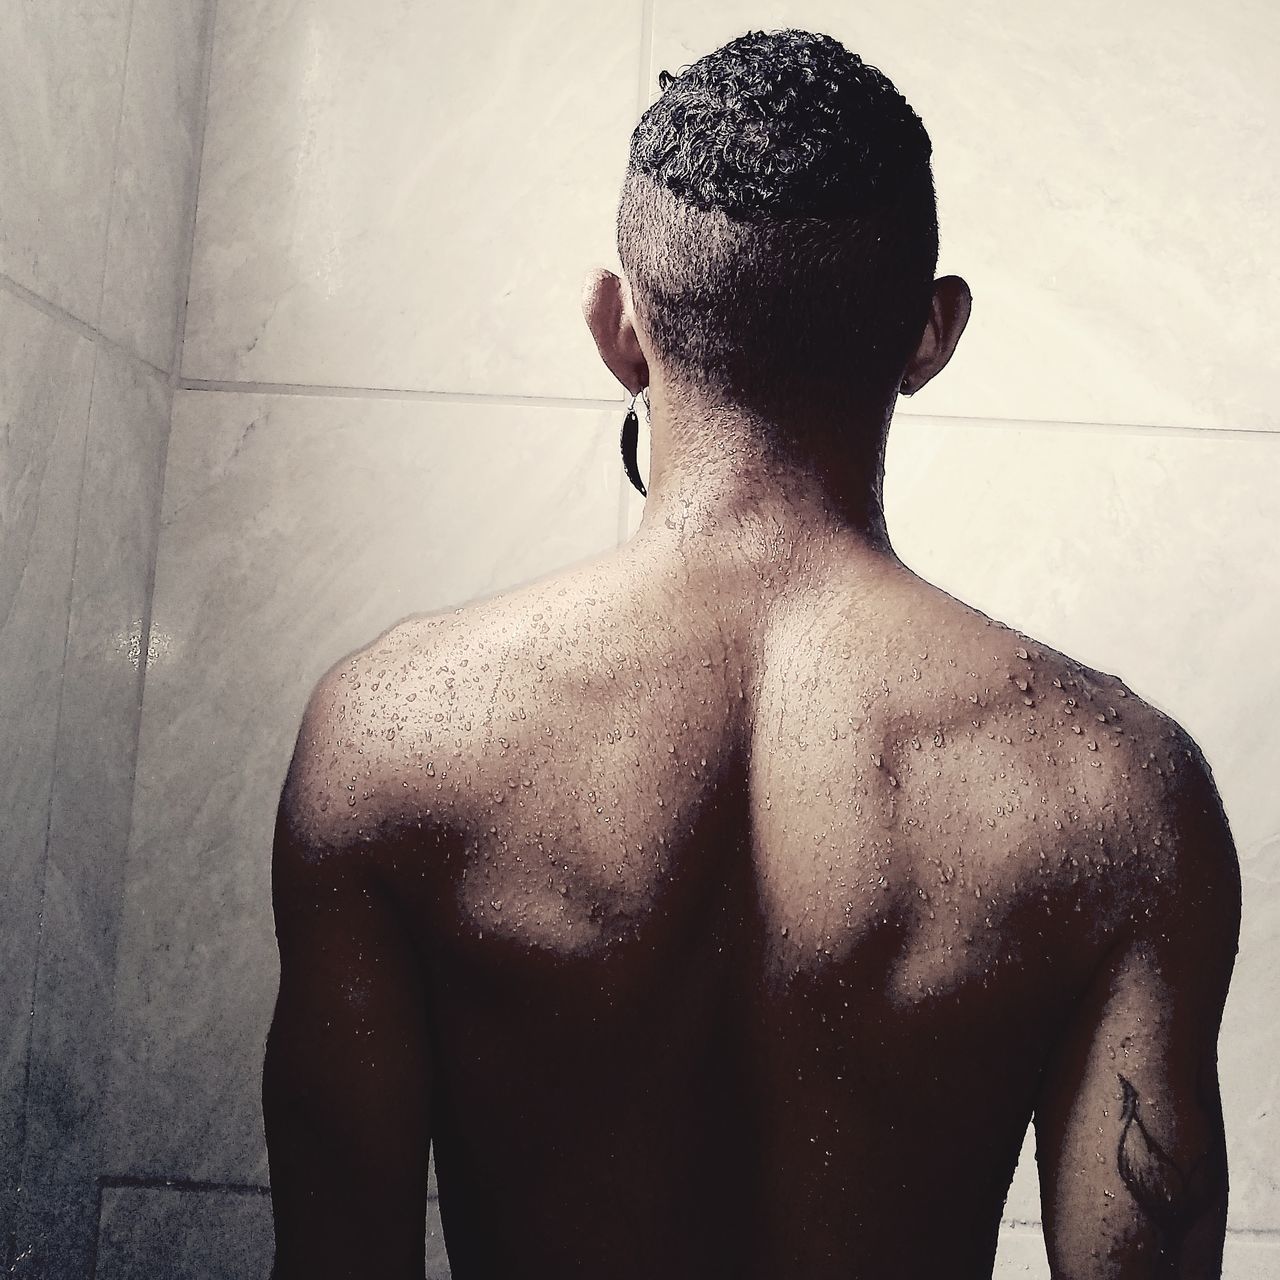 REAR VIEW OF SHIRTLESS MAN STANDING AGAINST WALL IN BATHROOM